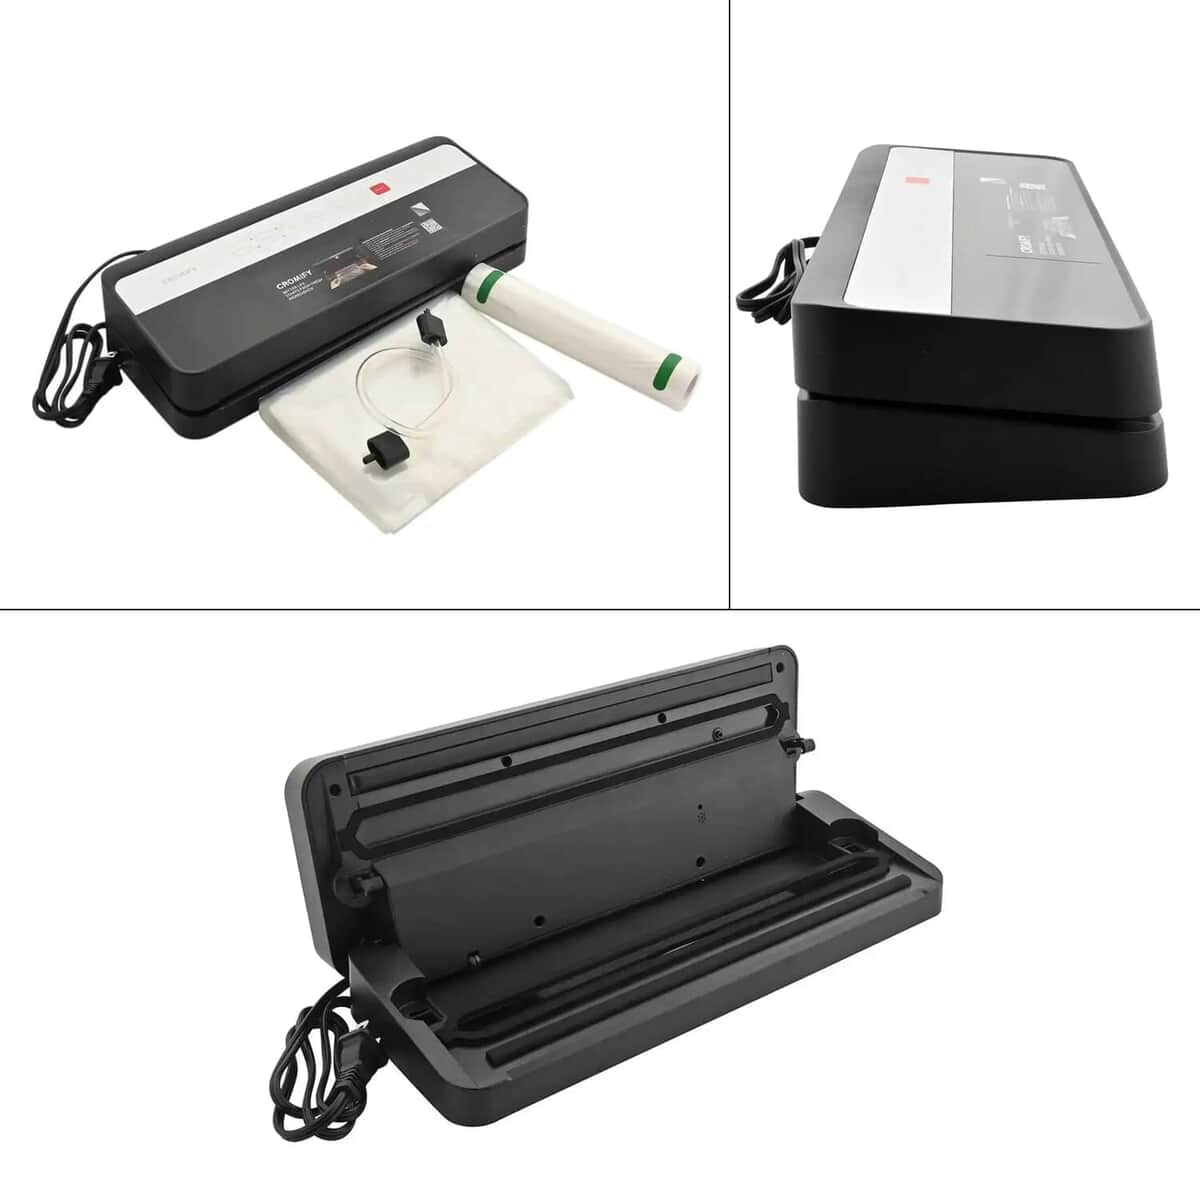 Cormify Black Vacuum Sealer System e9000-m, Compact Design Vacuum Sealing Machine For Automatic Food Sealer image number 6